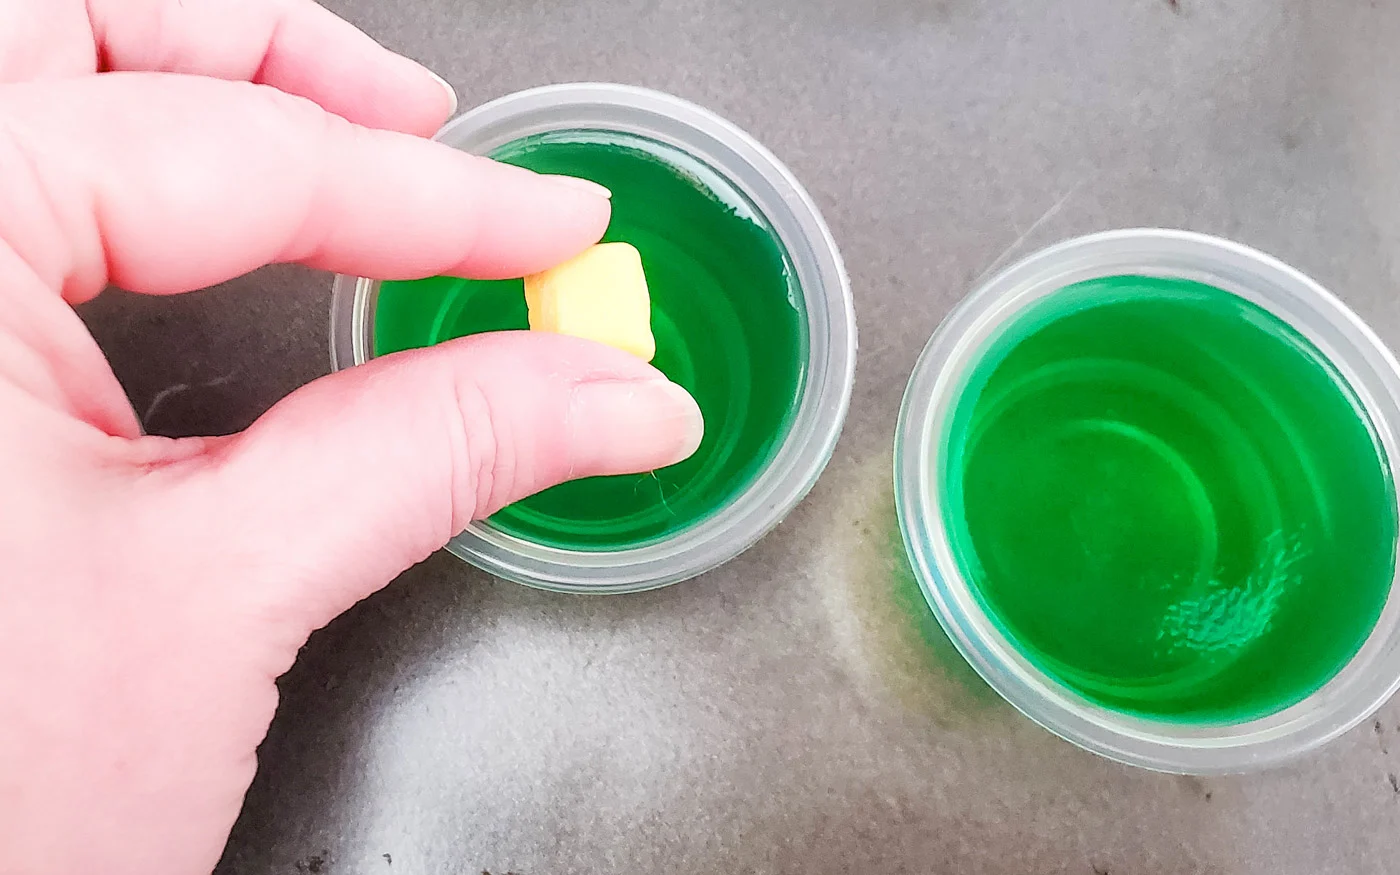 Adding a yello starburst candy on top of the jello shots for garnish.